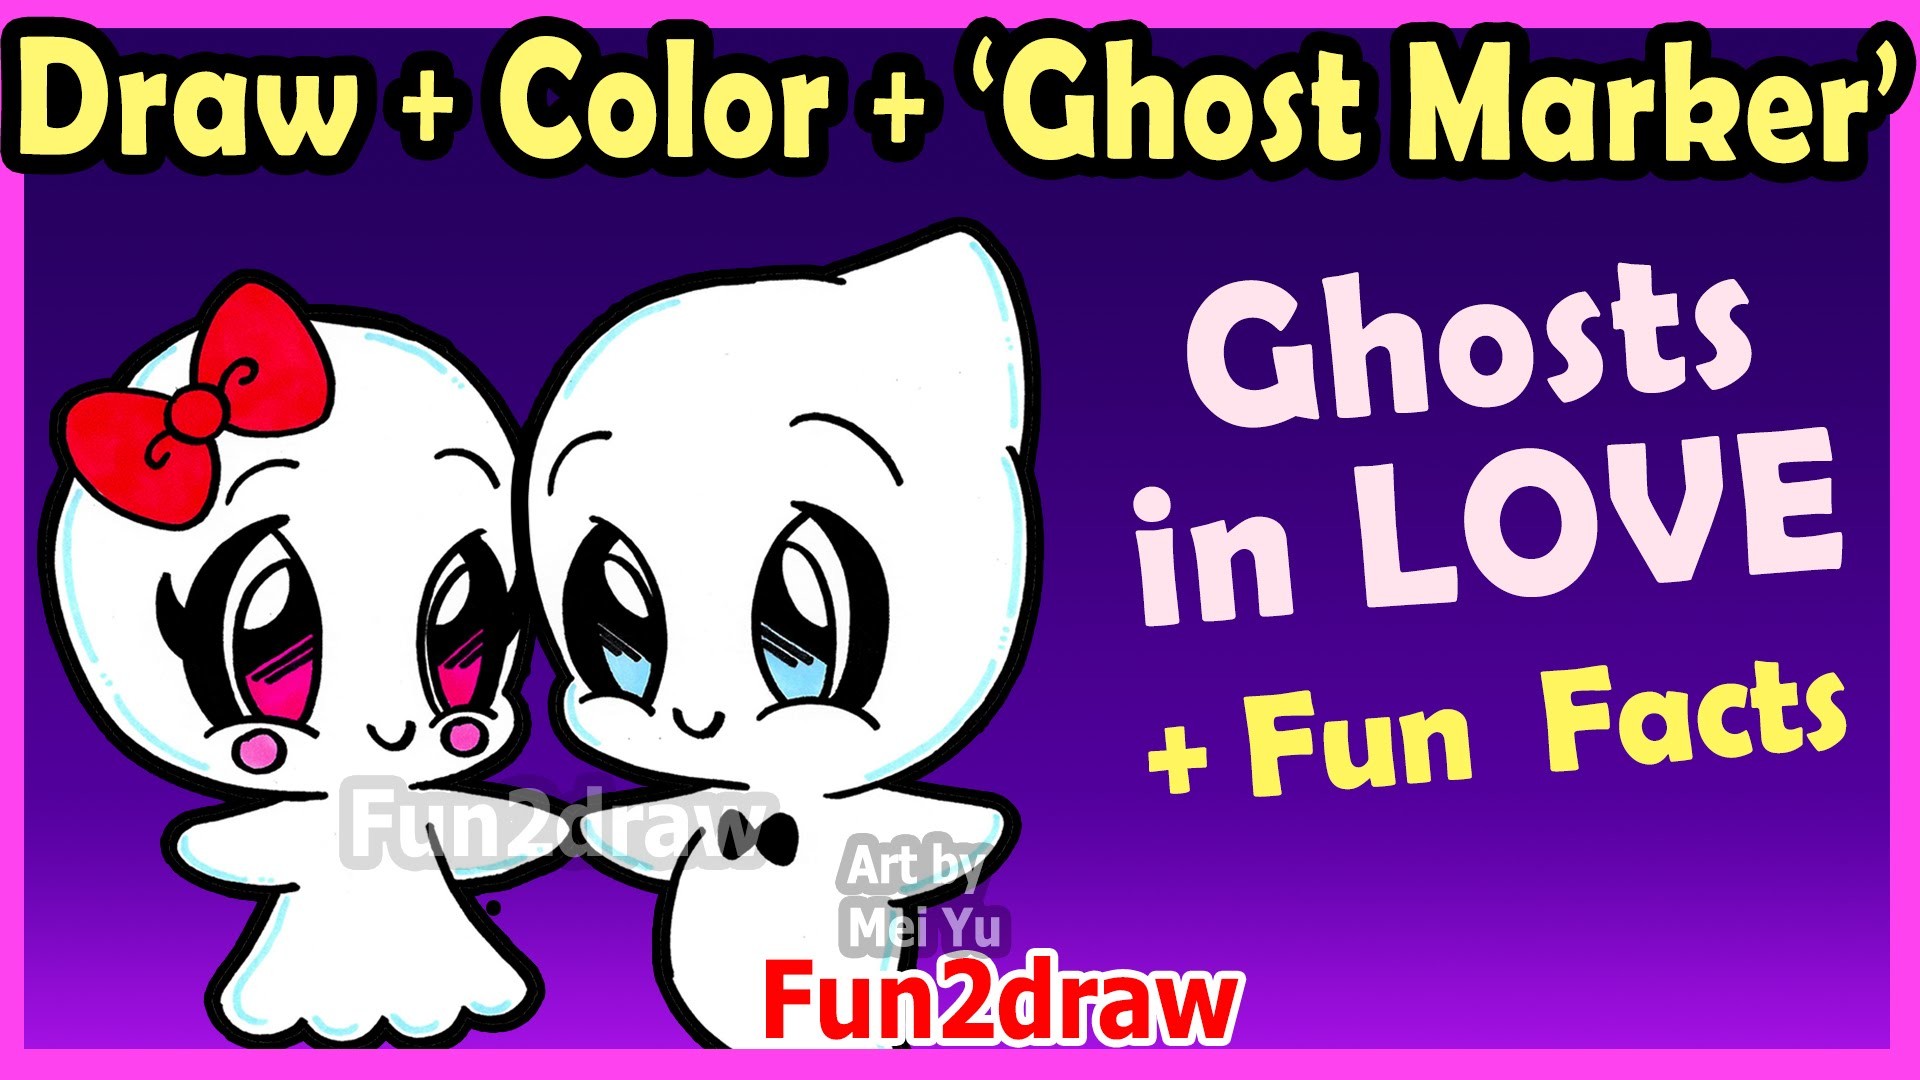 1920x1080 How to Draw and Color CUTE Ghost Couple in LOVE - Easy Cartoon Drawings  Halloween Fun2draw - YouTube